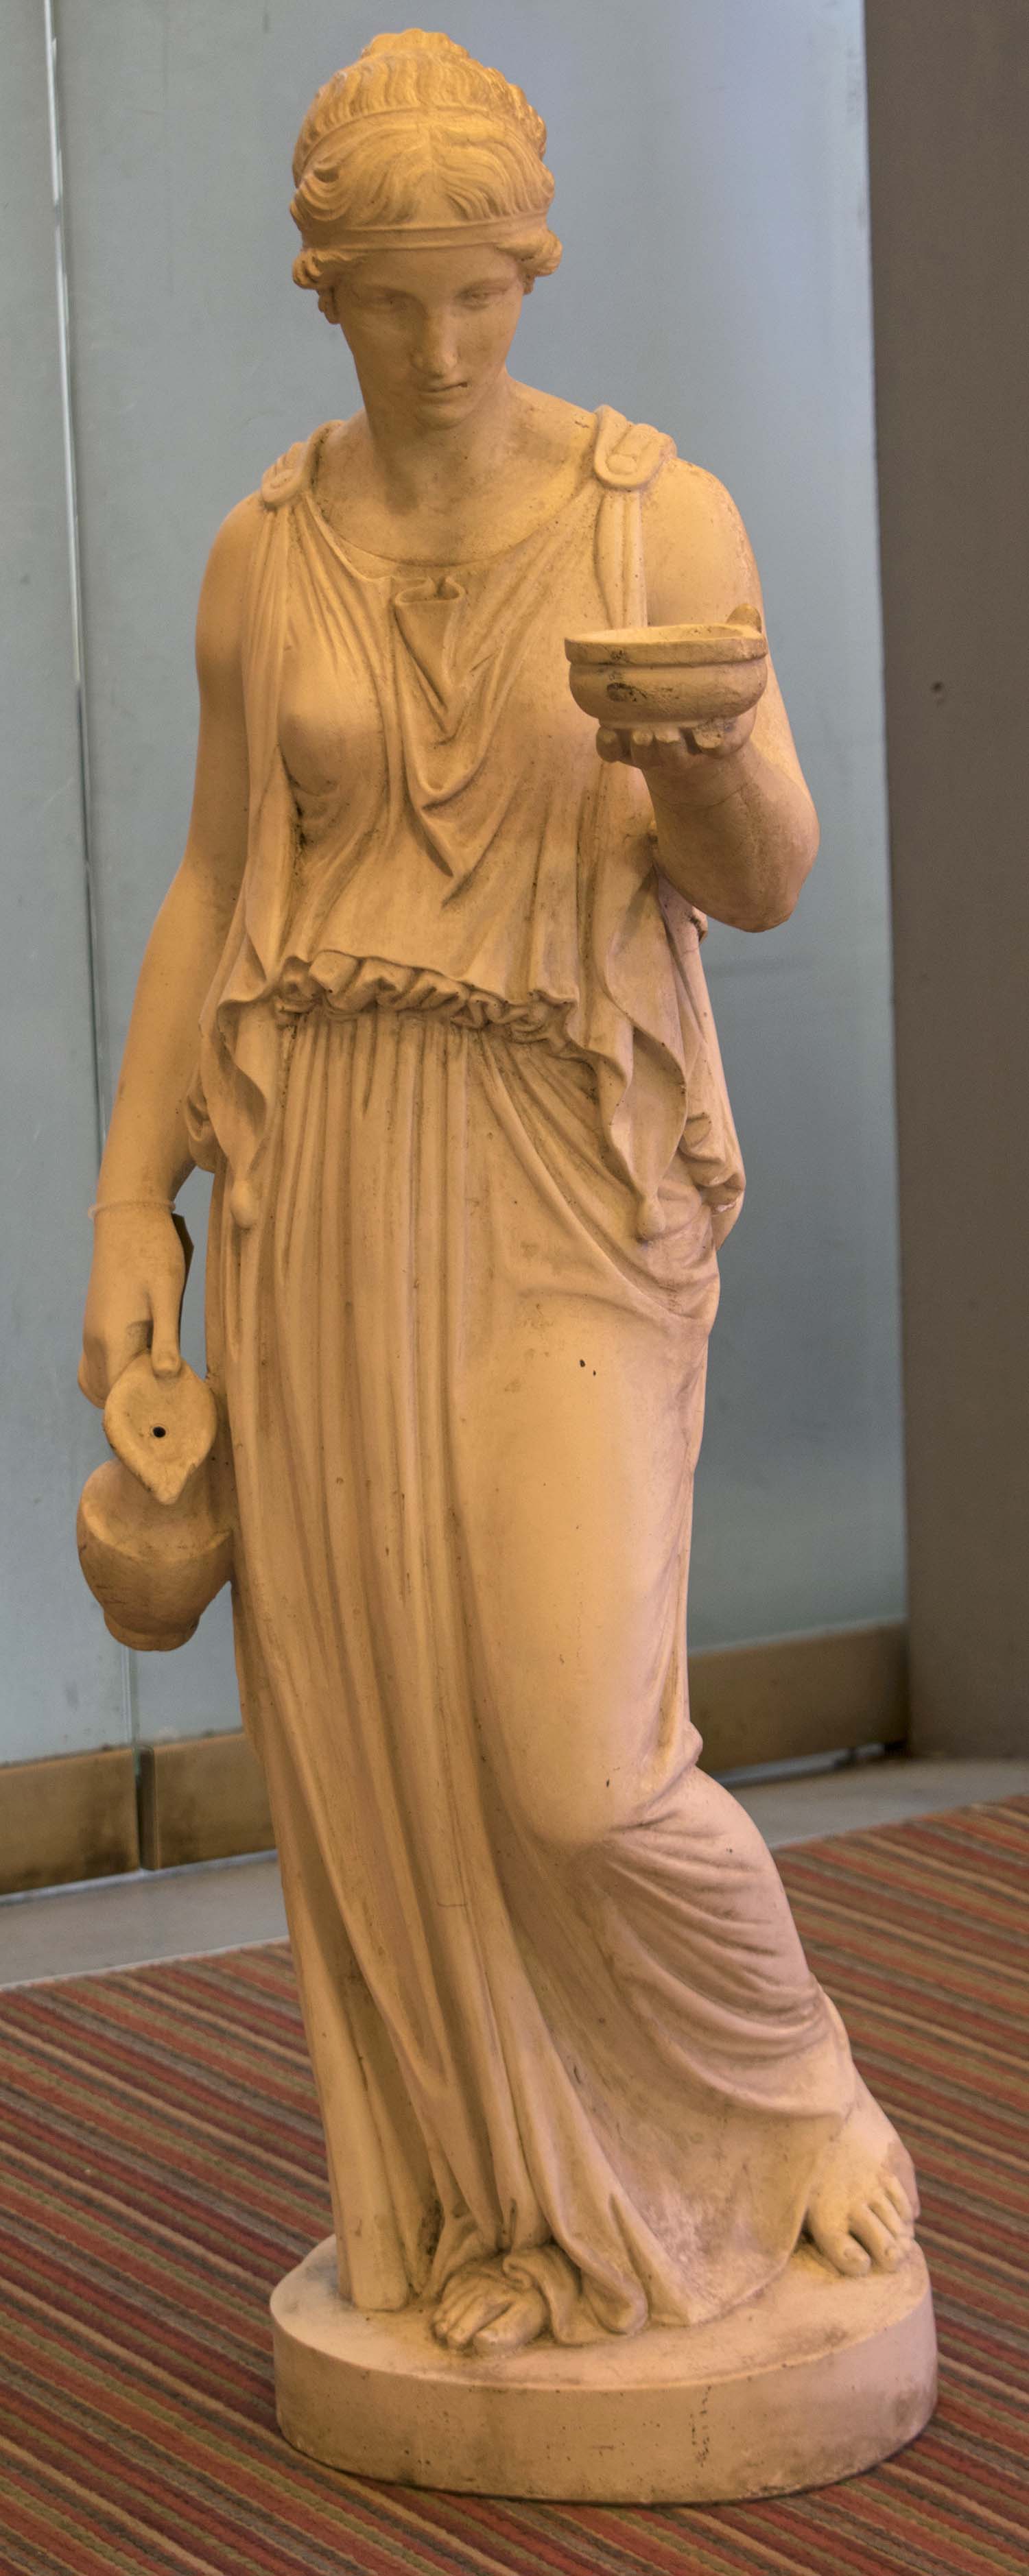 STATUE OF HEBE, Goddess of Youth, after RV Pavinia, early 20th century